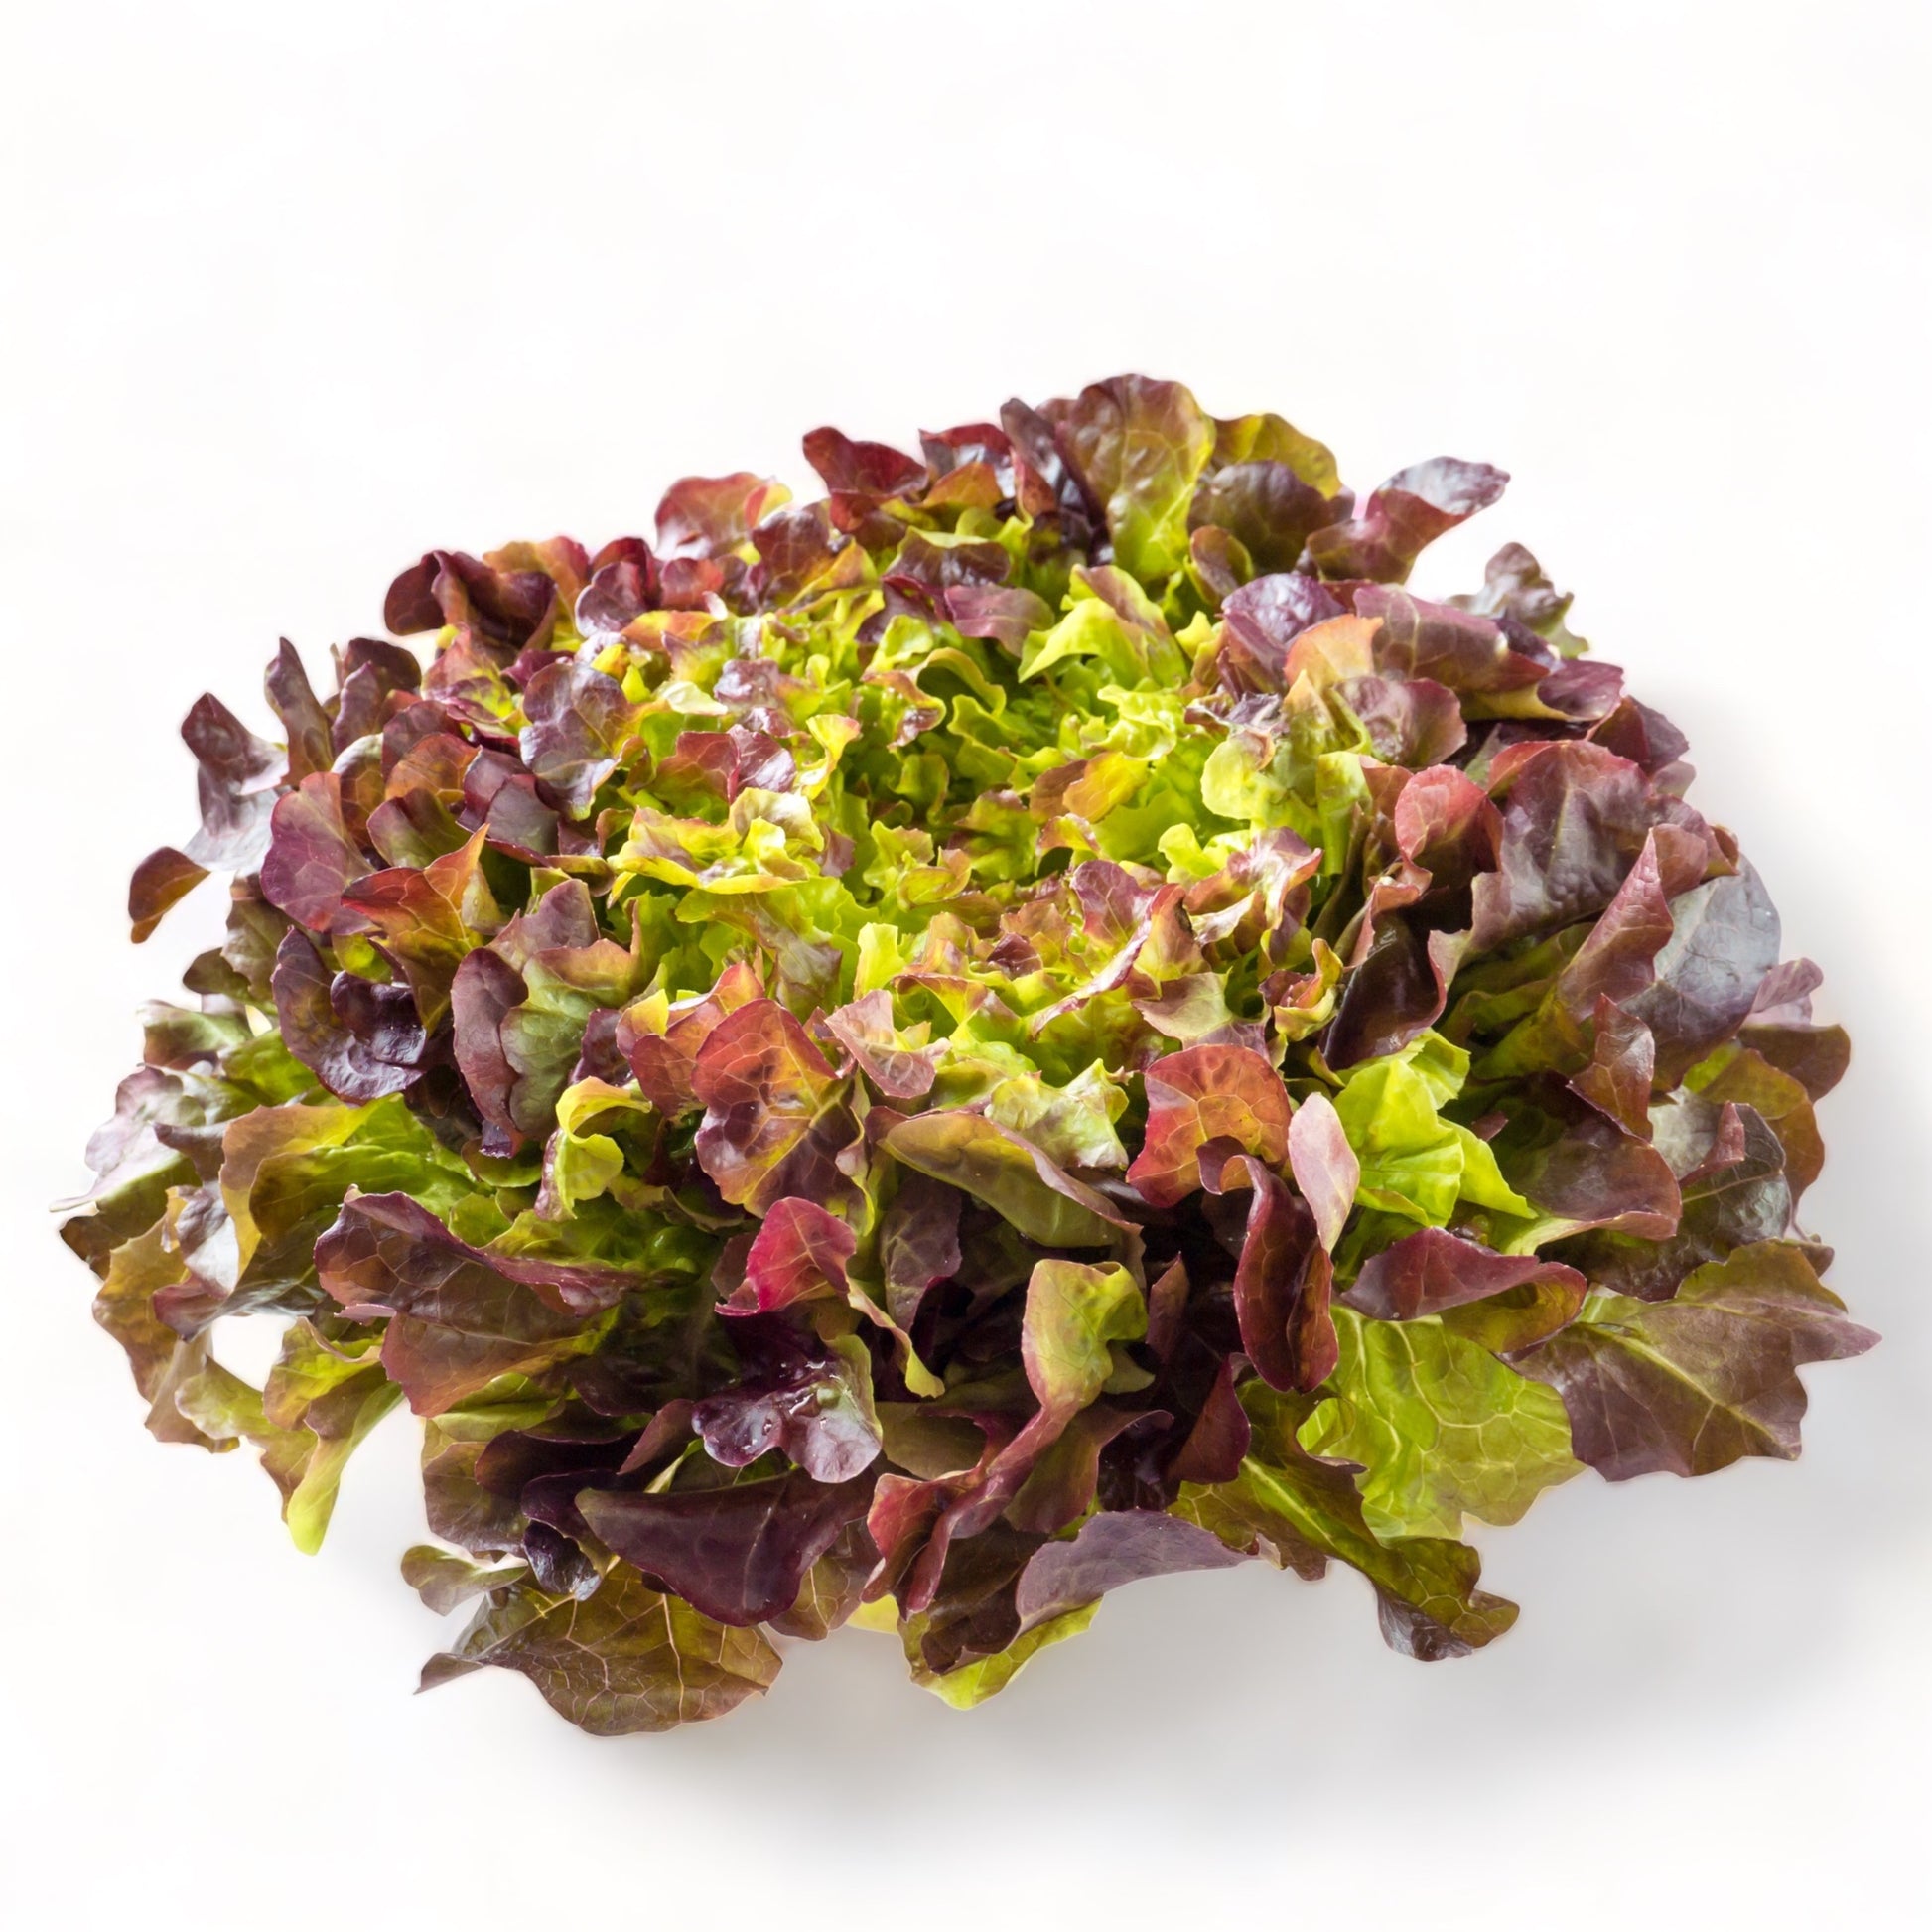 Fresh Ruby Red Leaf lettuce leaves arranged on a white surface